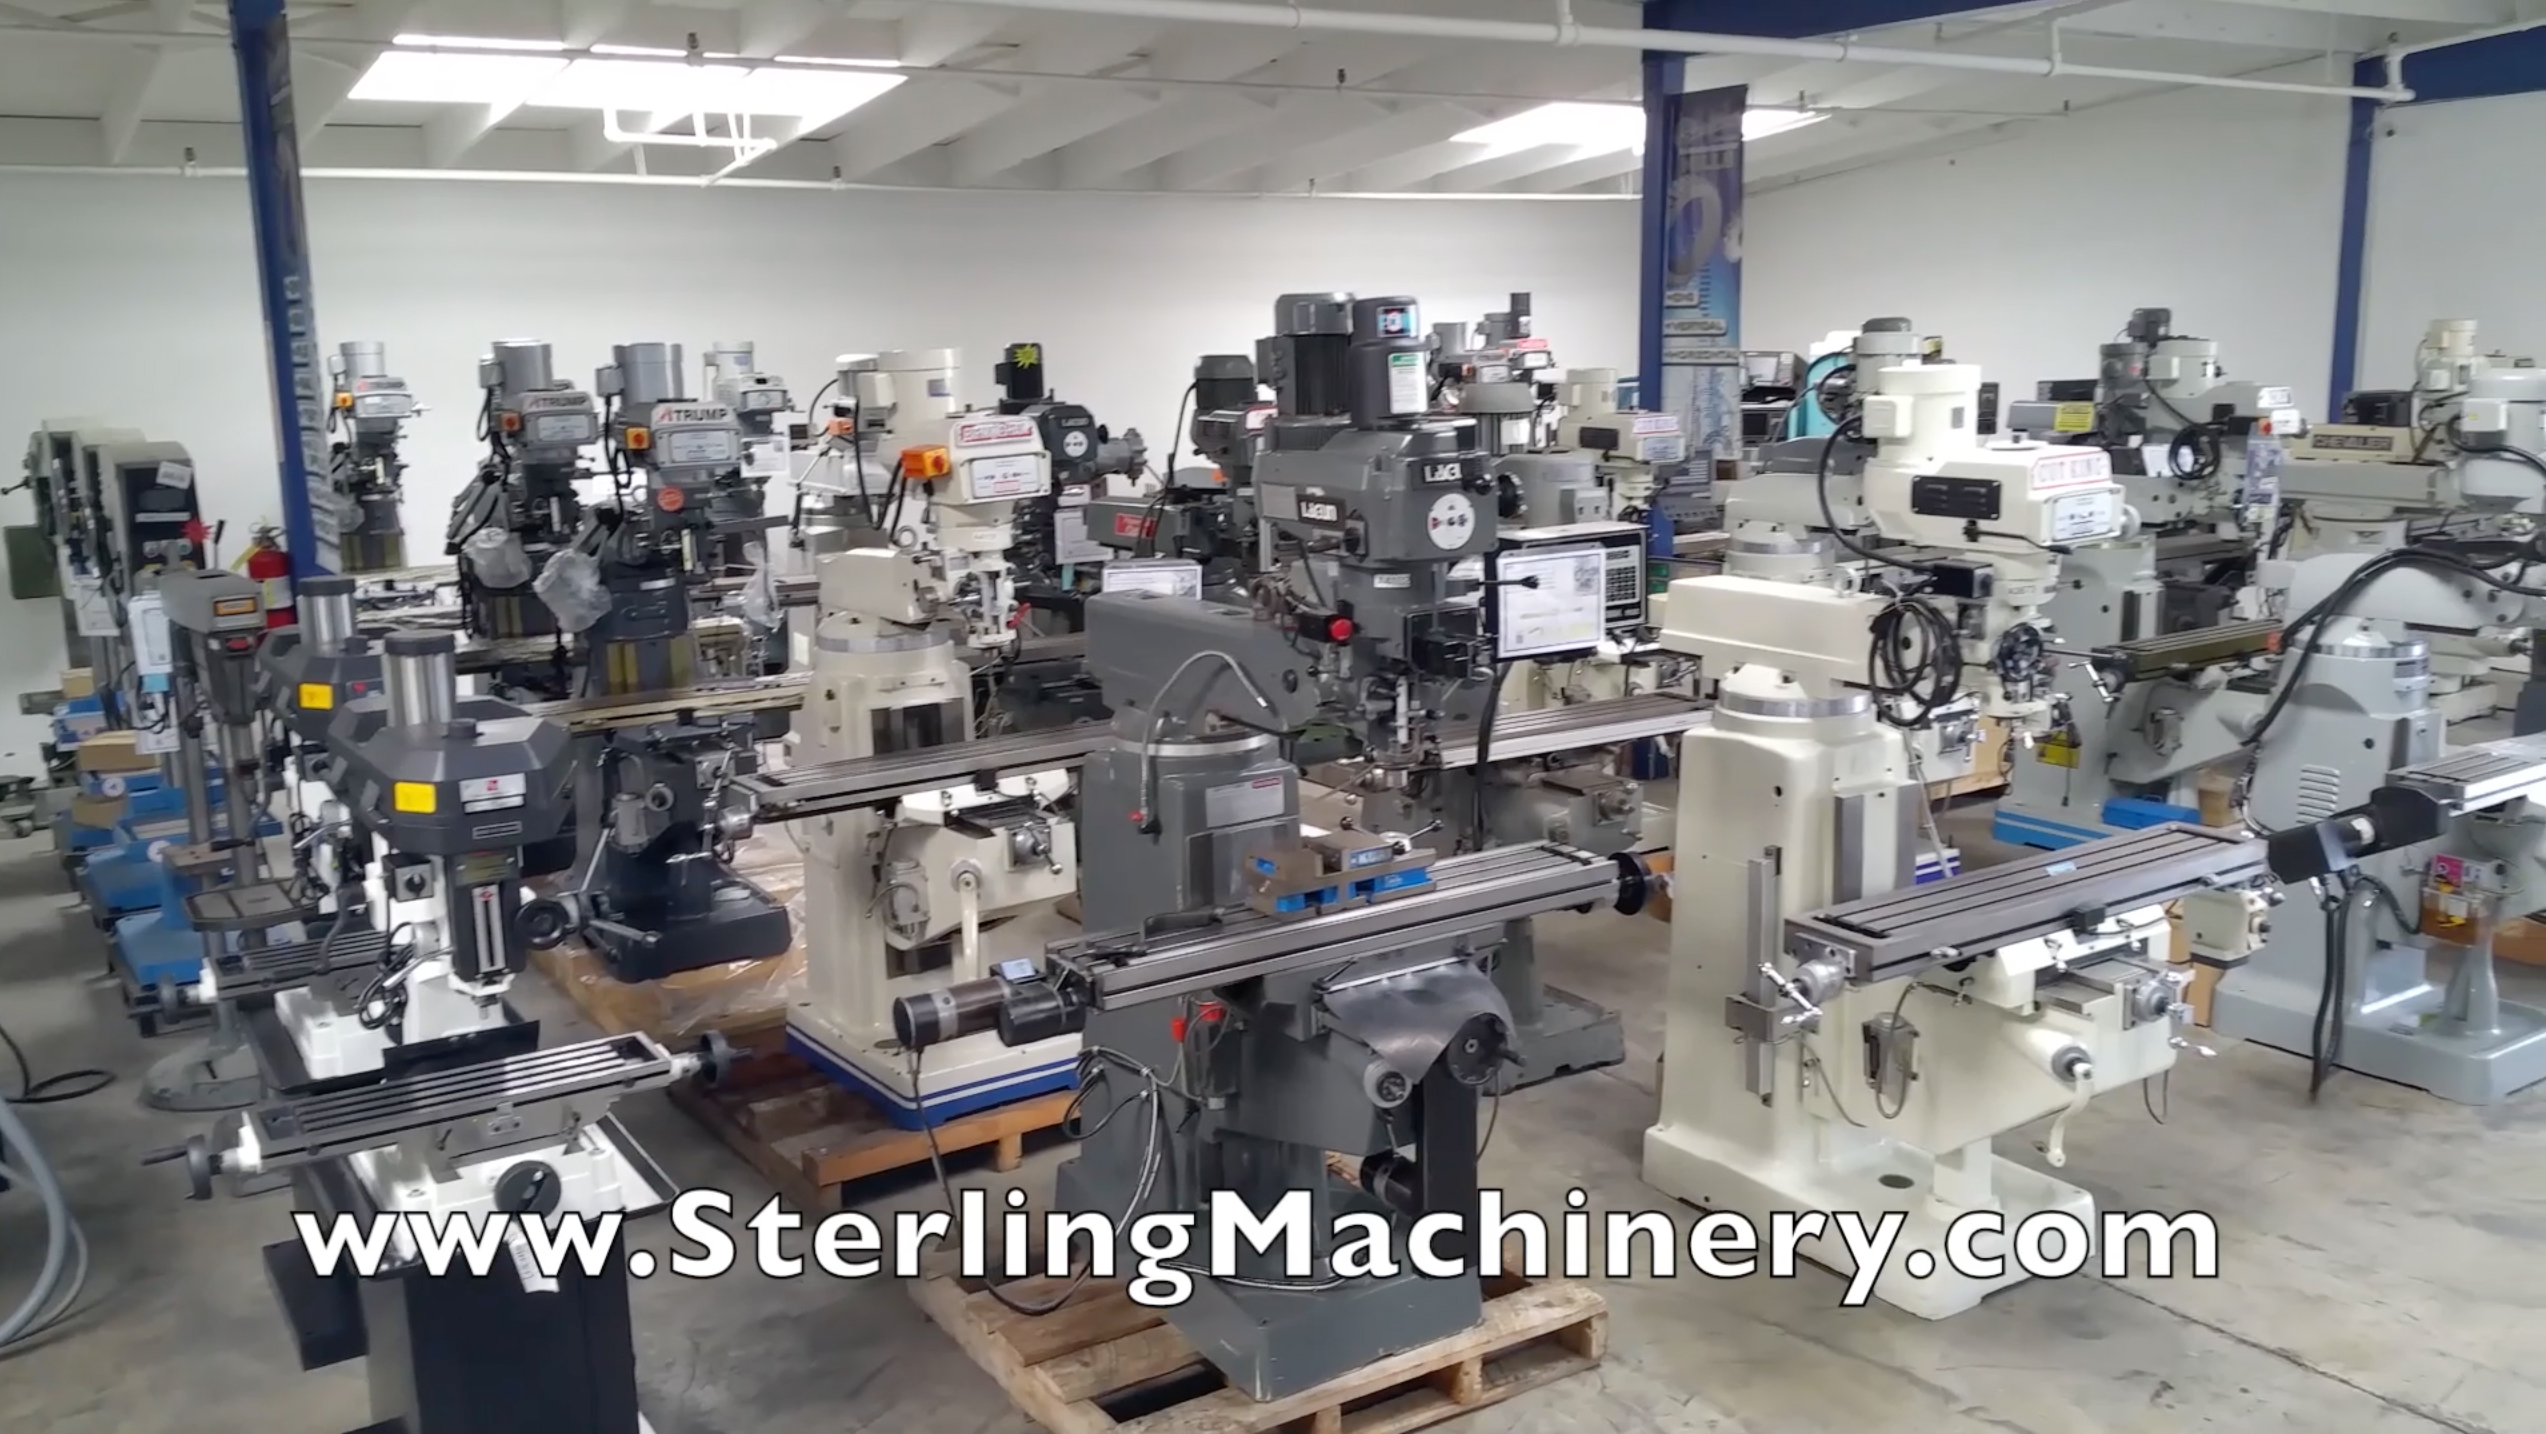 -Sterling Machinery Exchange Company video www.SterlingMachinery.com-01